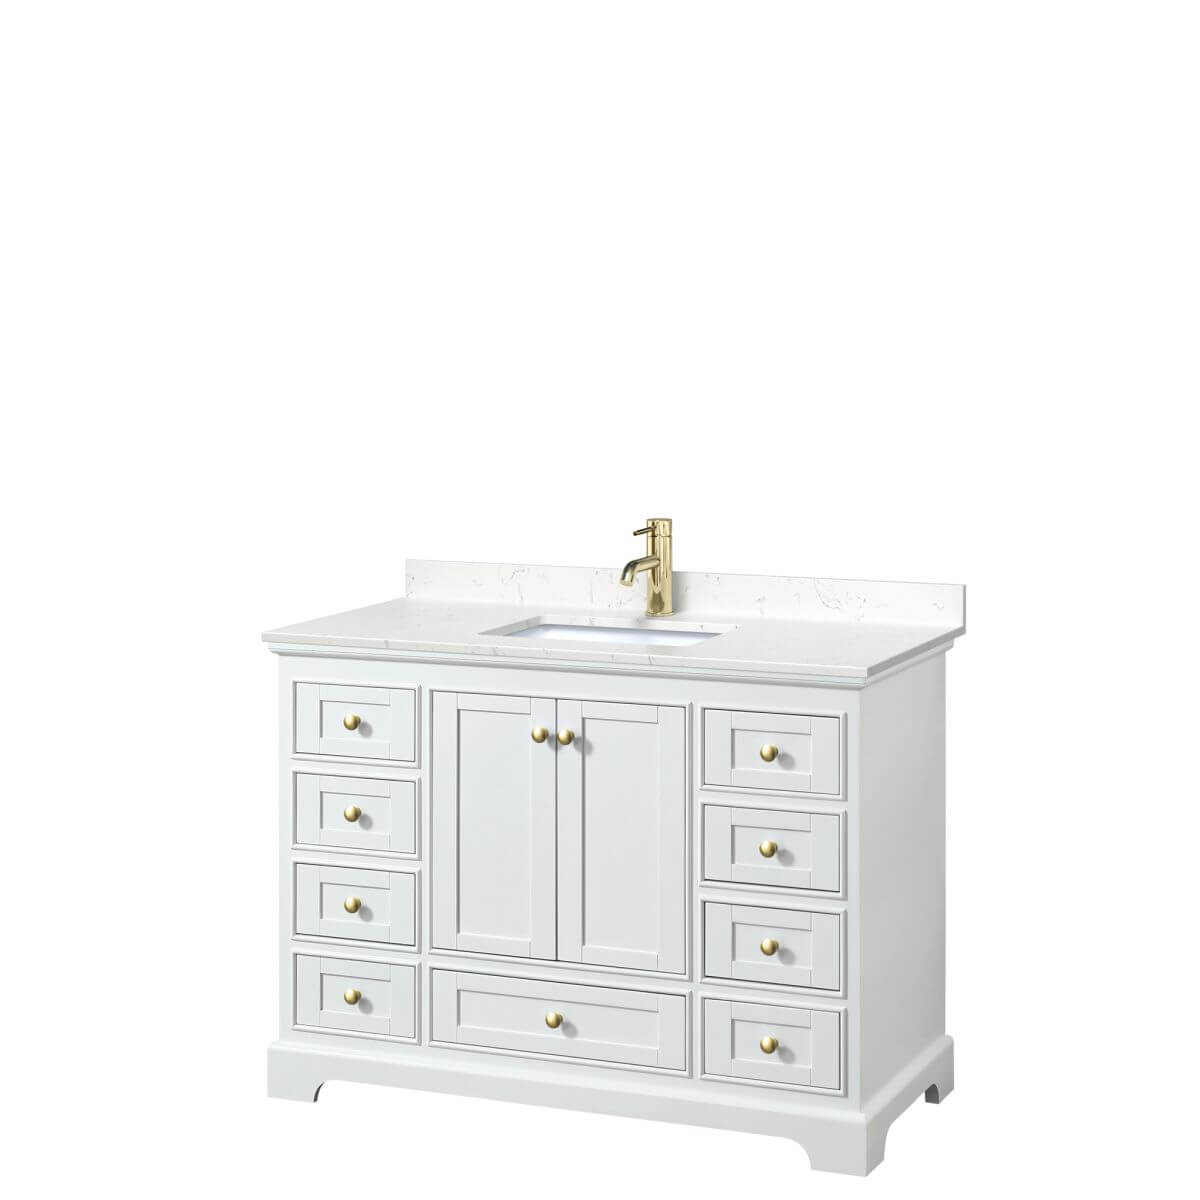 Wyndham Collection Deborah 48 inch Single Bathroom Vanity in White with Carrara Cultured Marble Countertop, Undermount Square Sink, Brushed Gold Trim and No Mirror - WCS202048SWGC2UNSMXX